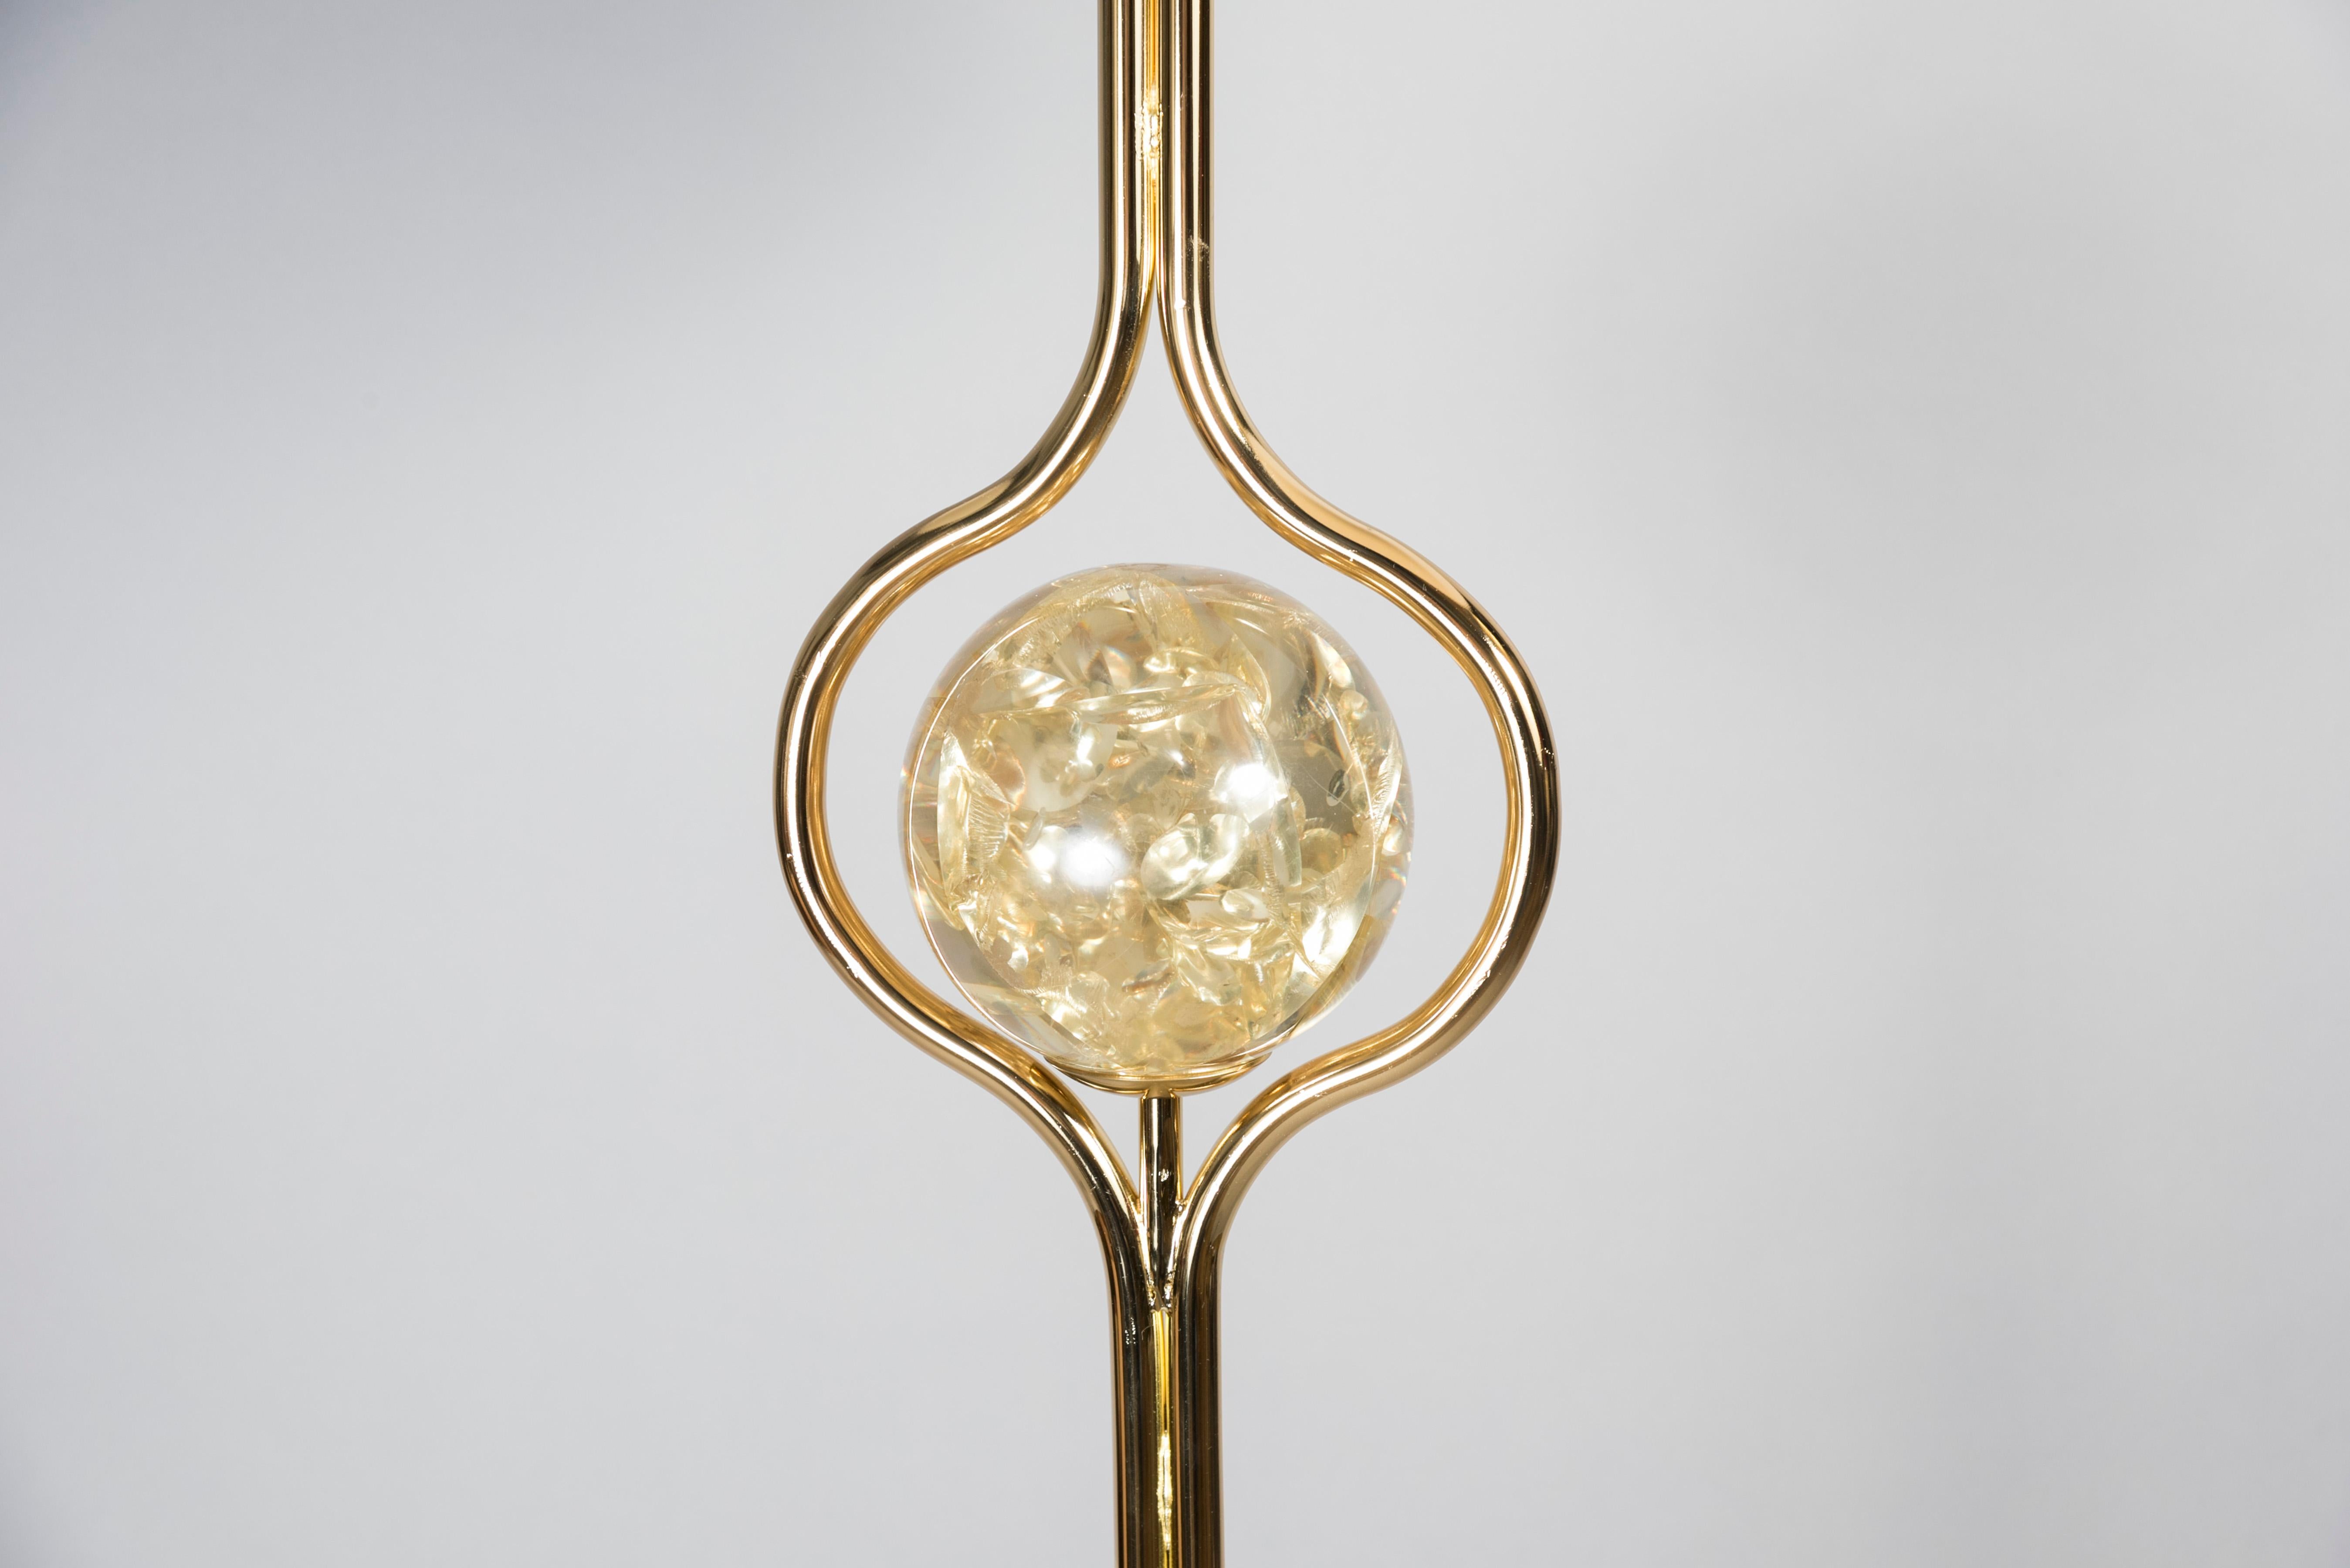 French 1970's Polished Brass Floor Lamp by Marie-Claude De Fouquières For Sale